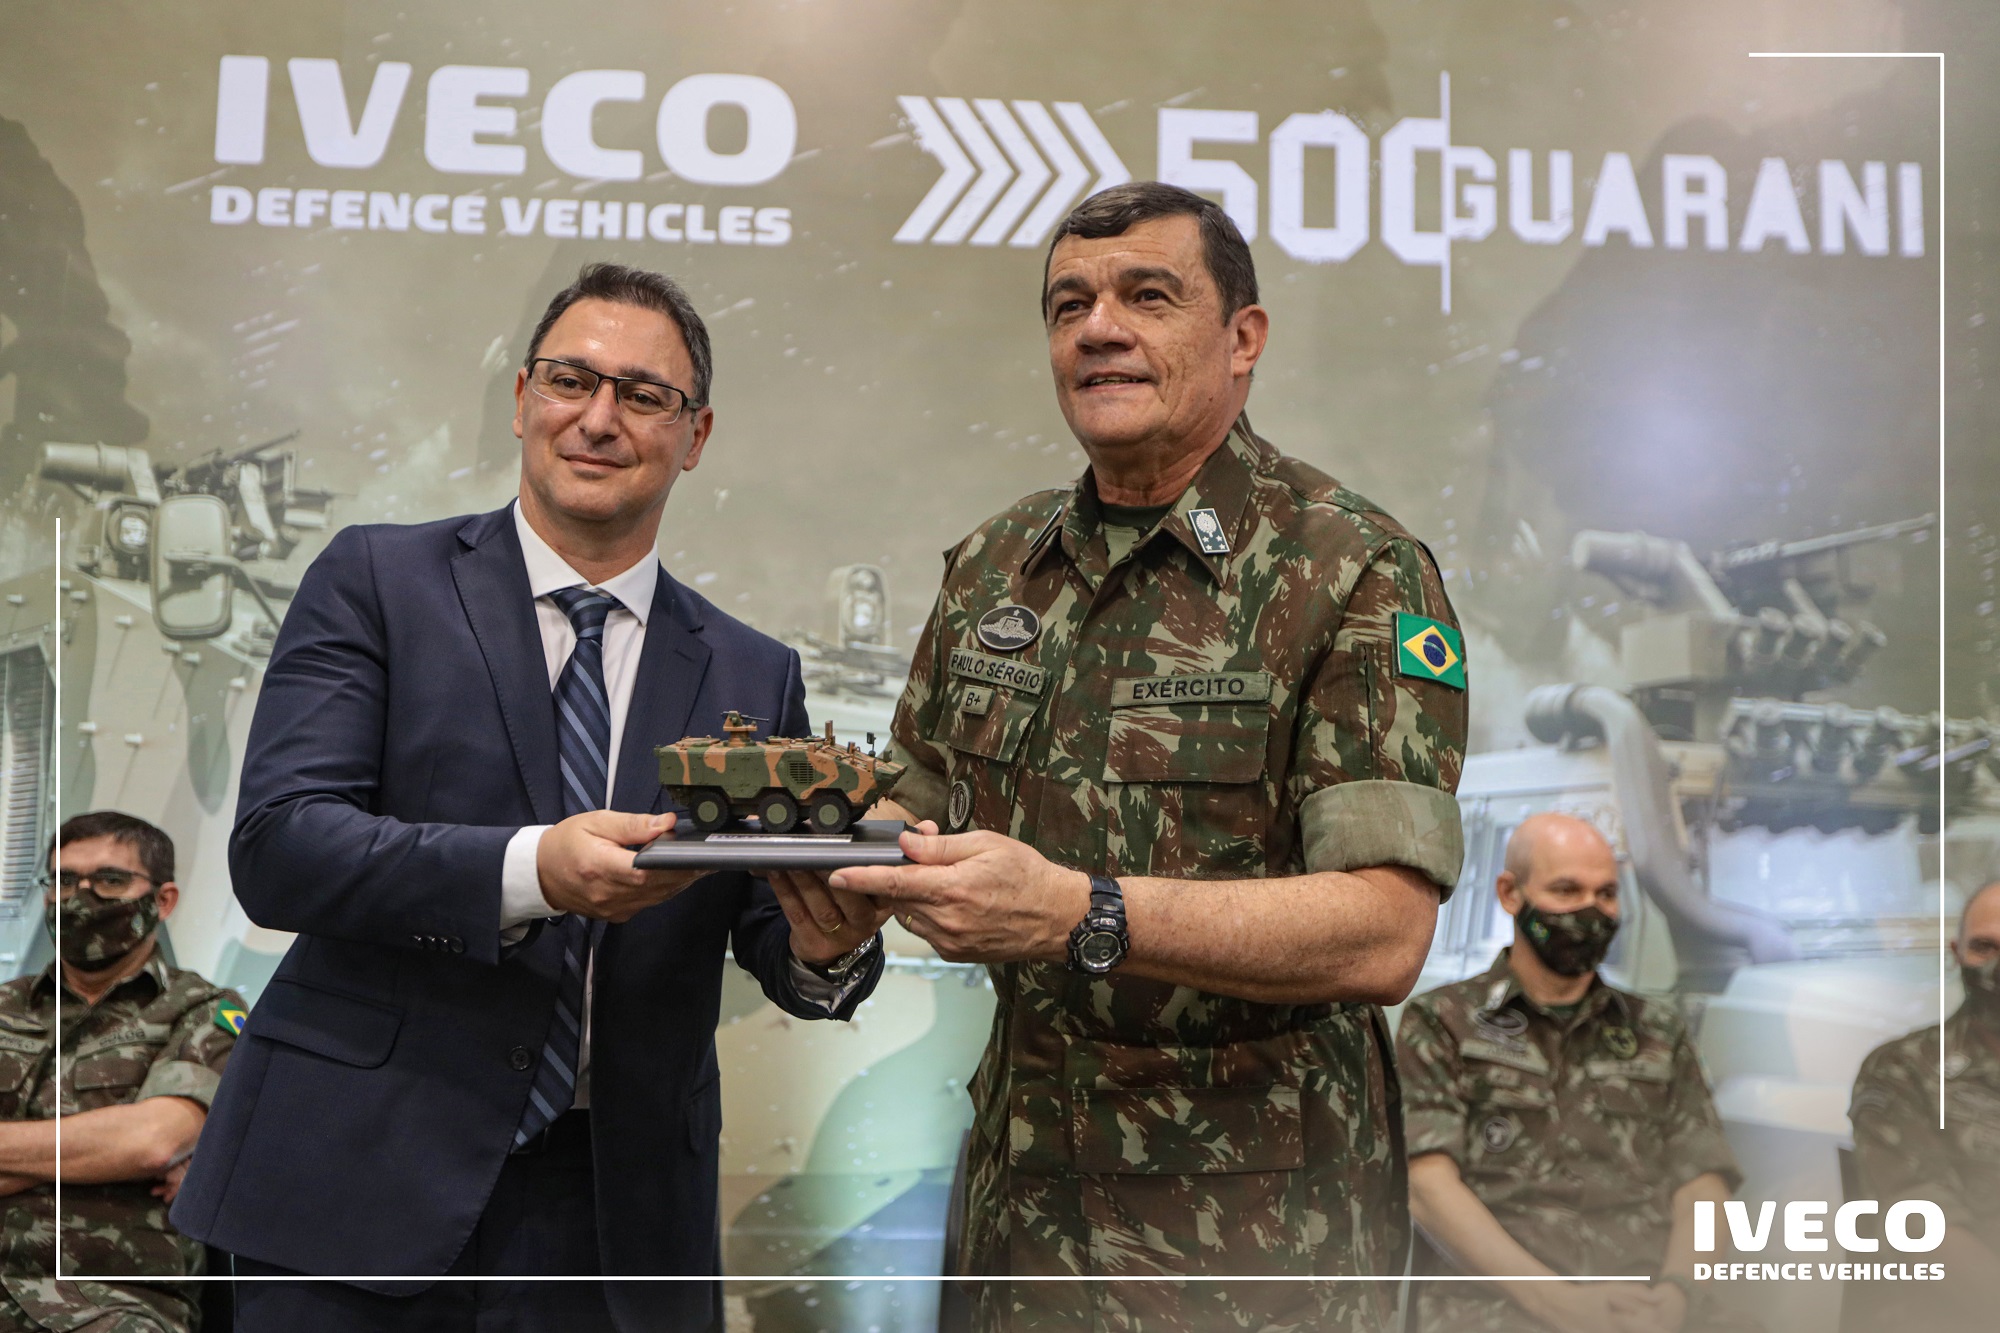 Iveco Defence Vehicles Delivers 500th Guarani and LMV-BR Batch to Brazilian Army